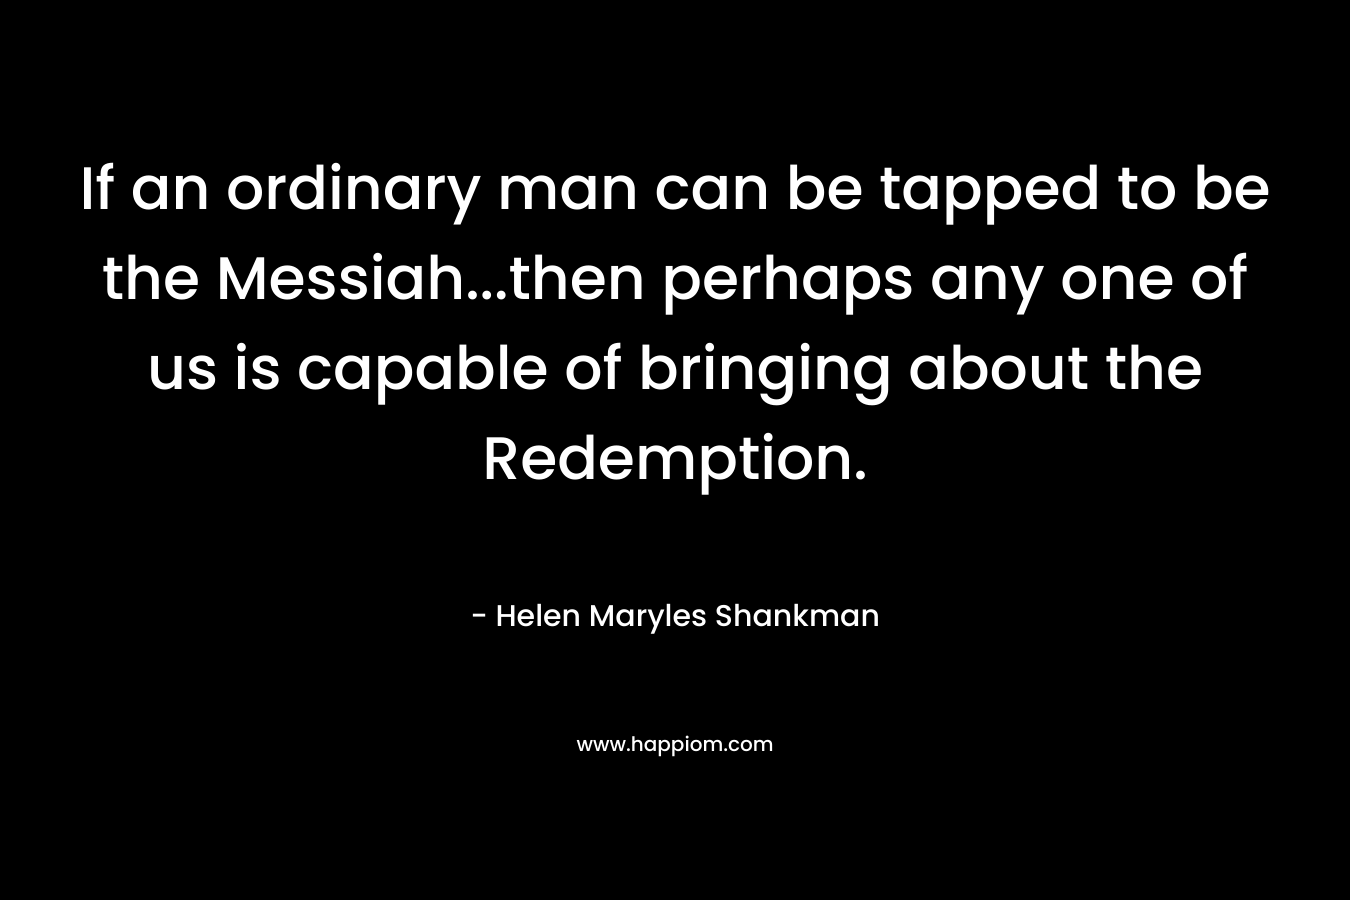 If an ordinary man can be tapped to be the Messiah...then perhaps any one of us is capable of bringing about the Redemption.